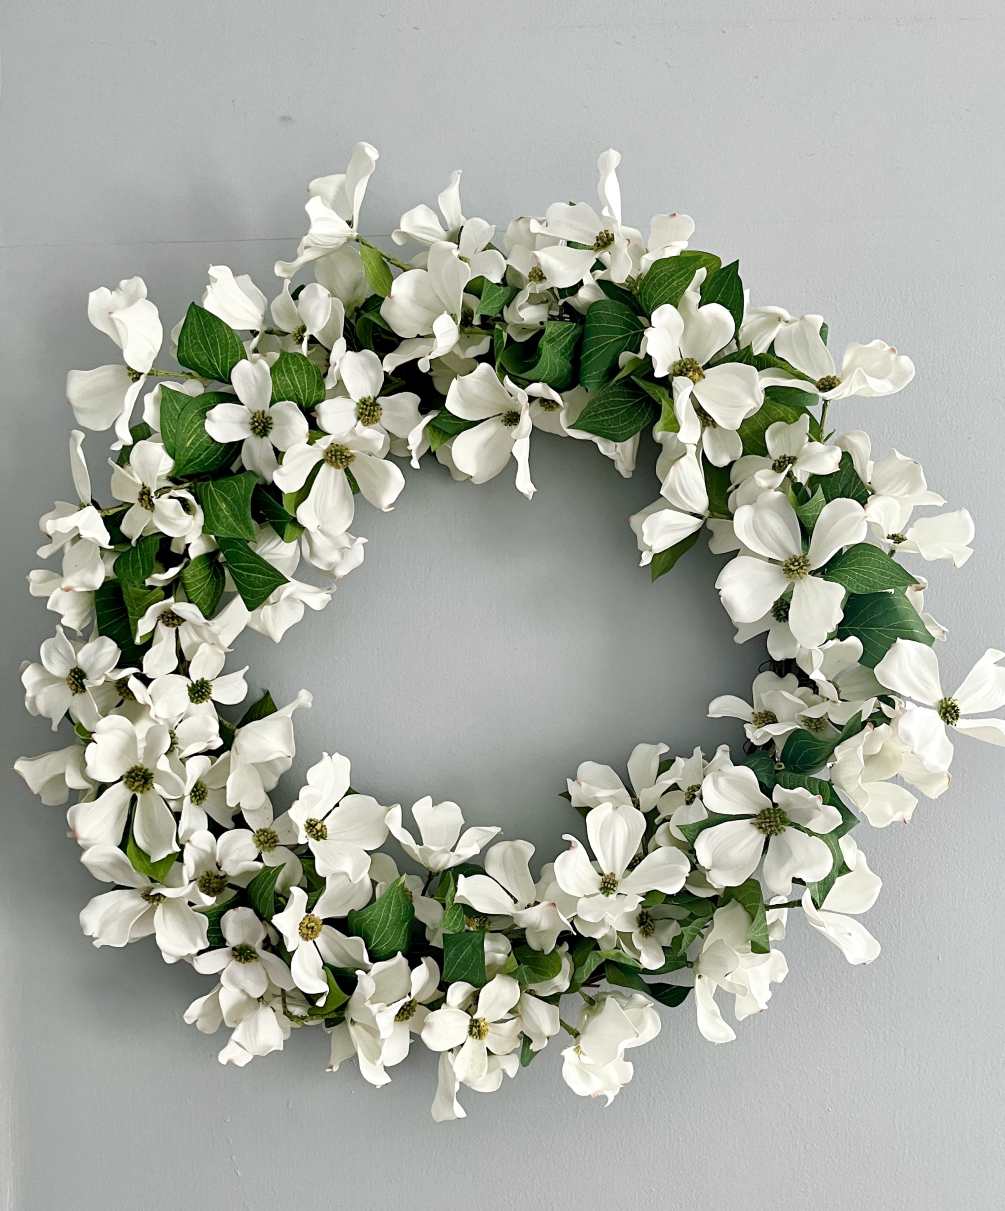 A beautiful all white wreath made of artificial flowers so you can